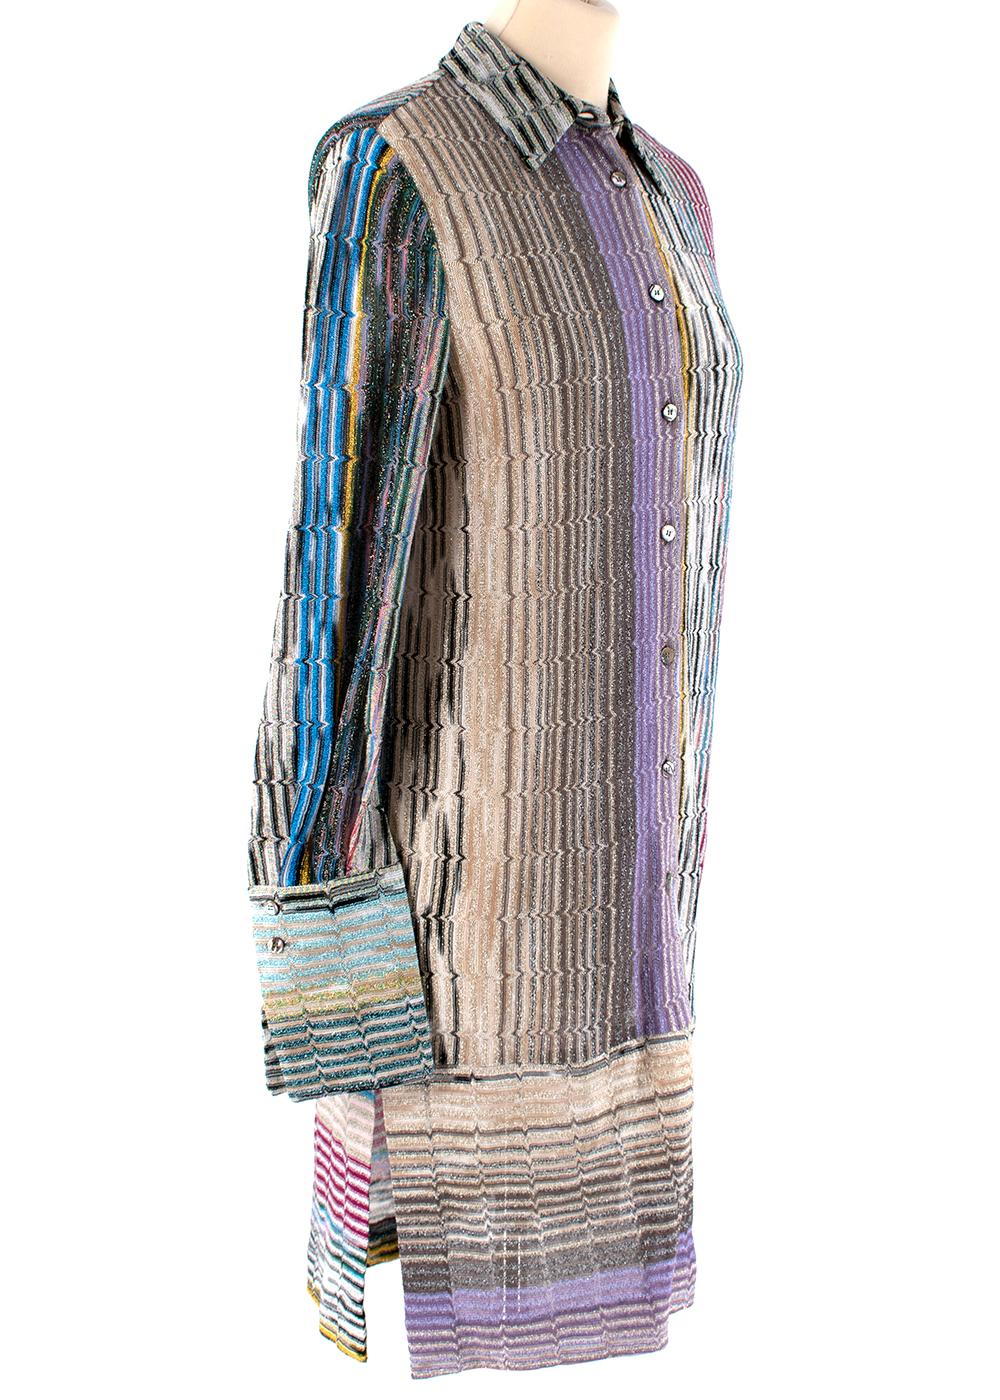 Missoni metallic knit button down shirt dress

-multicoloured metallic knit striped
- Elongated cuffs with buttons
- Made in Italy

Measurements are taken laying flat, seam to seam. 
Length from highest point of neck to hem (not including collar) :